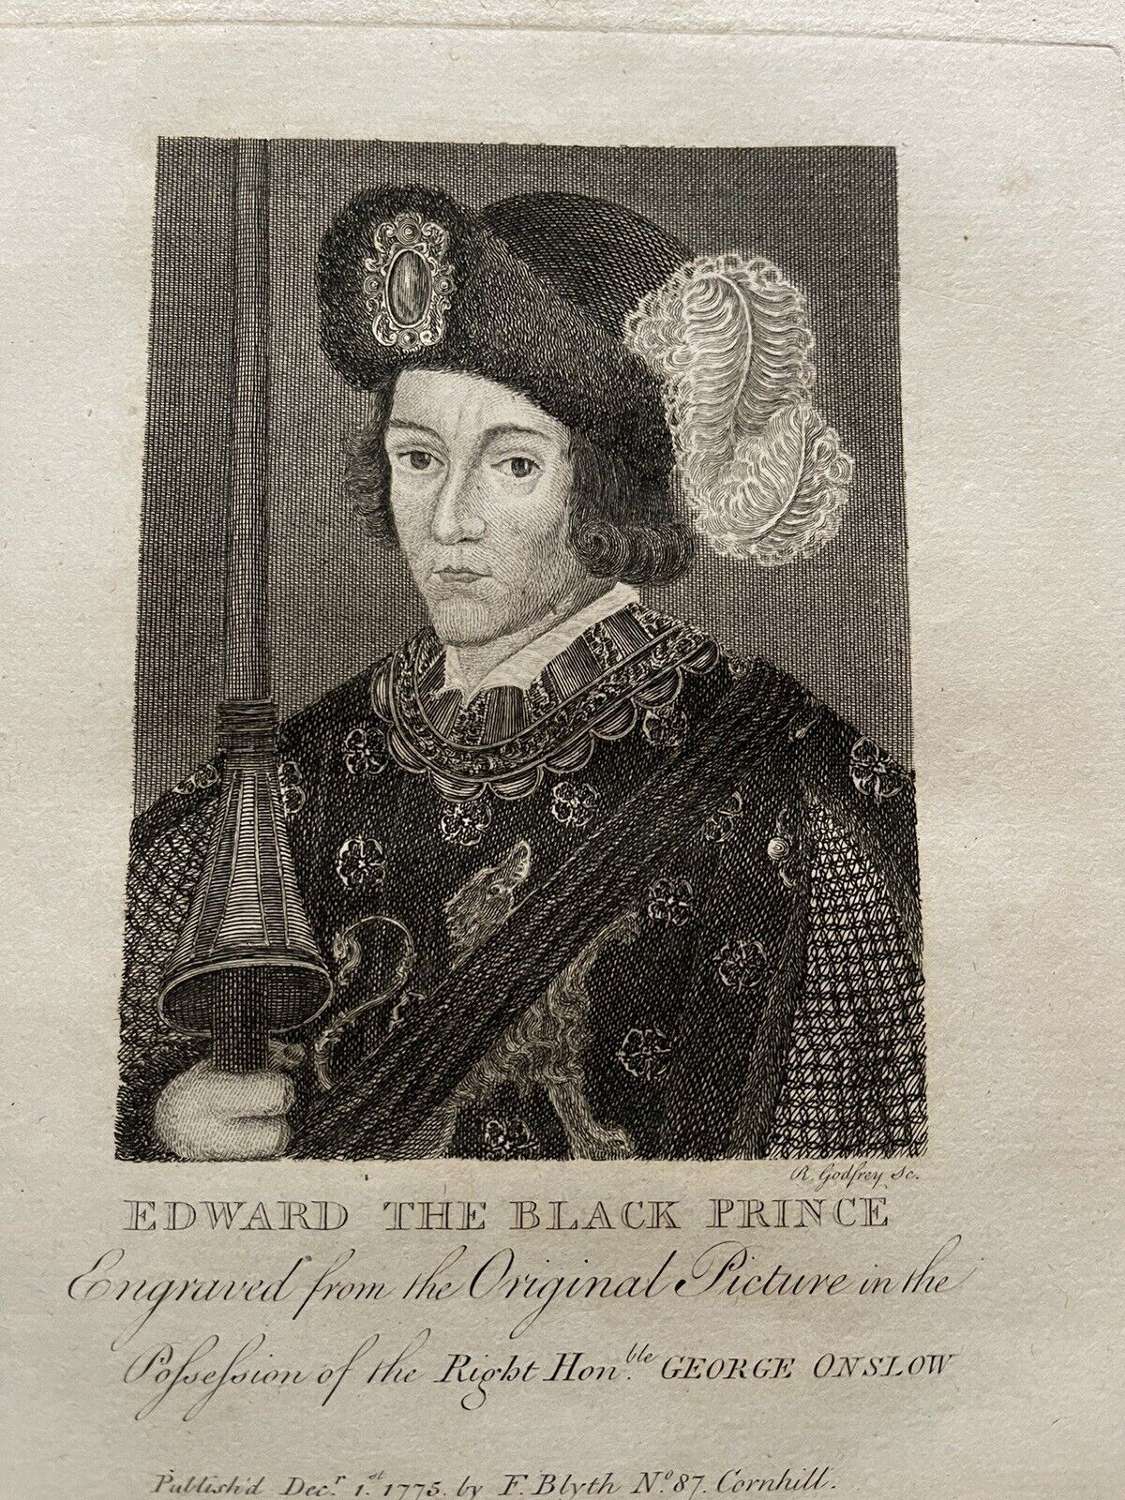 Antique Copper Plate Engraving Edward The Black Prince 1775